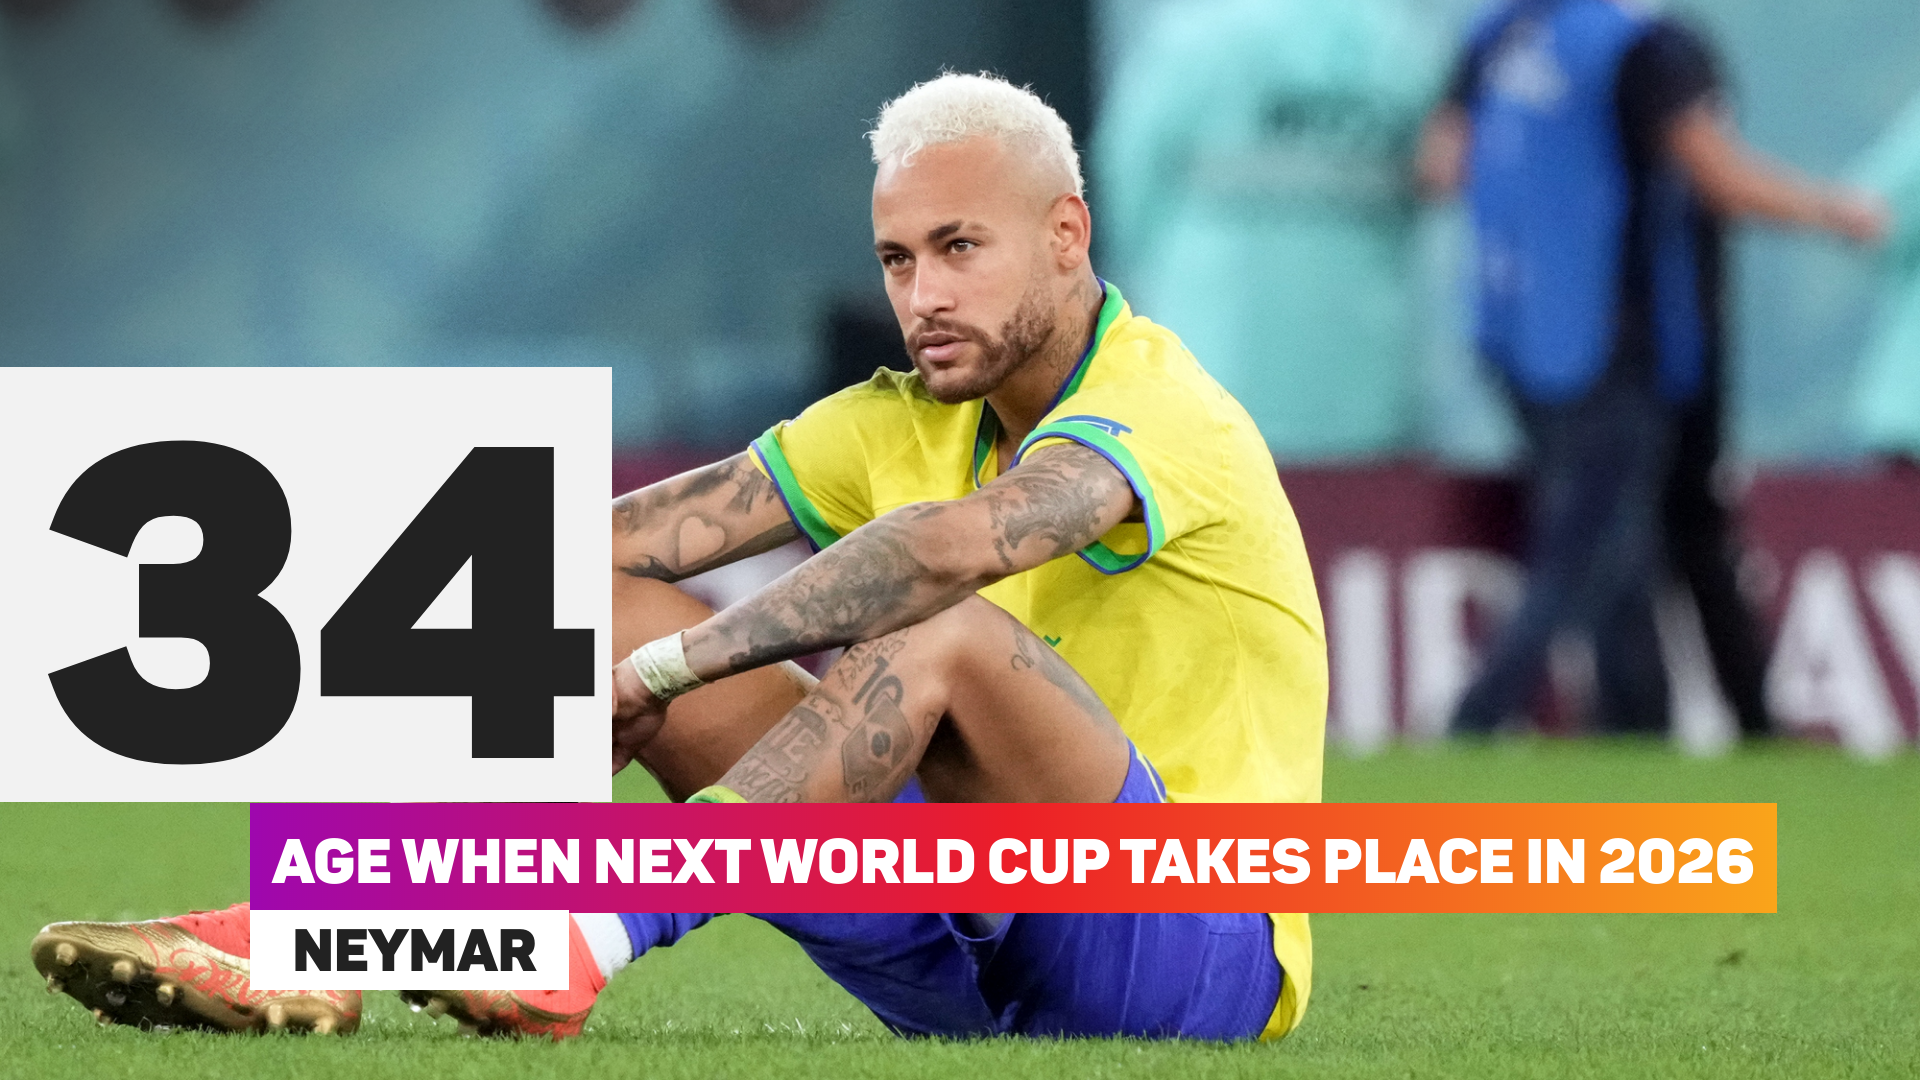 It is unclear whether Neymar will play at the next World Cup in 2026